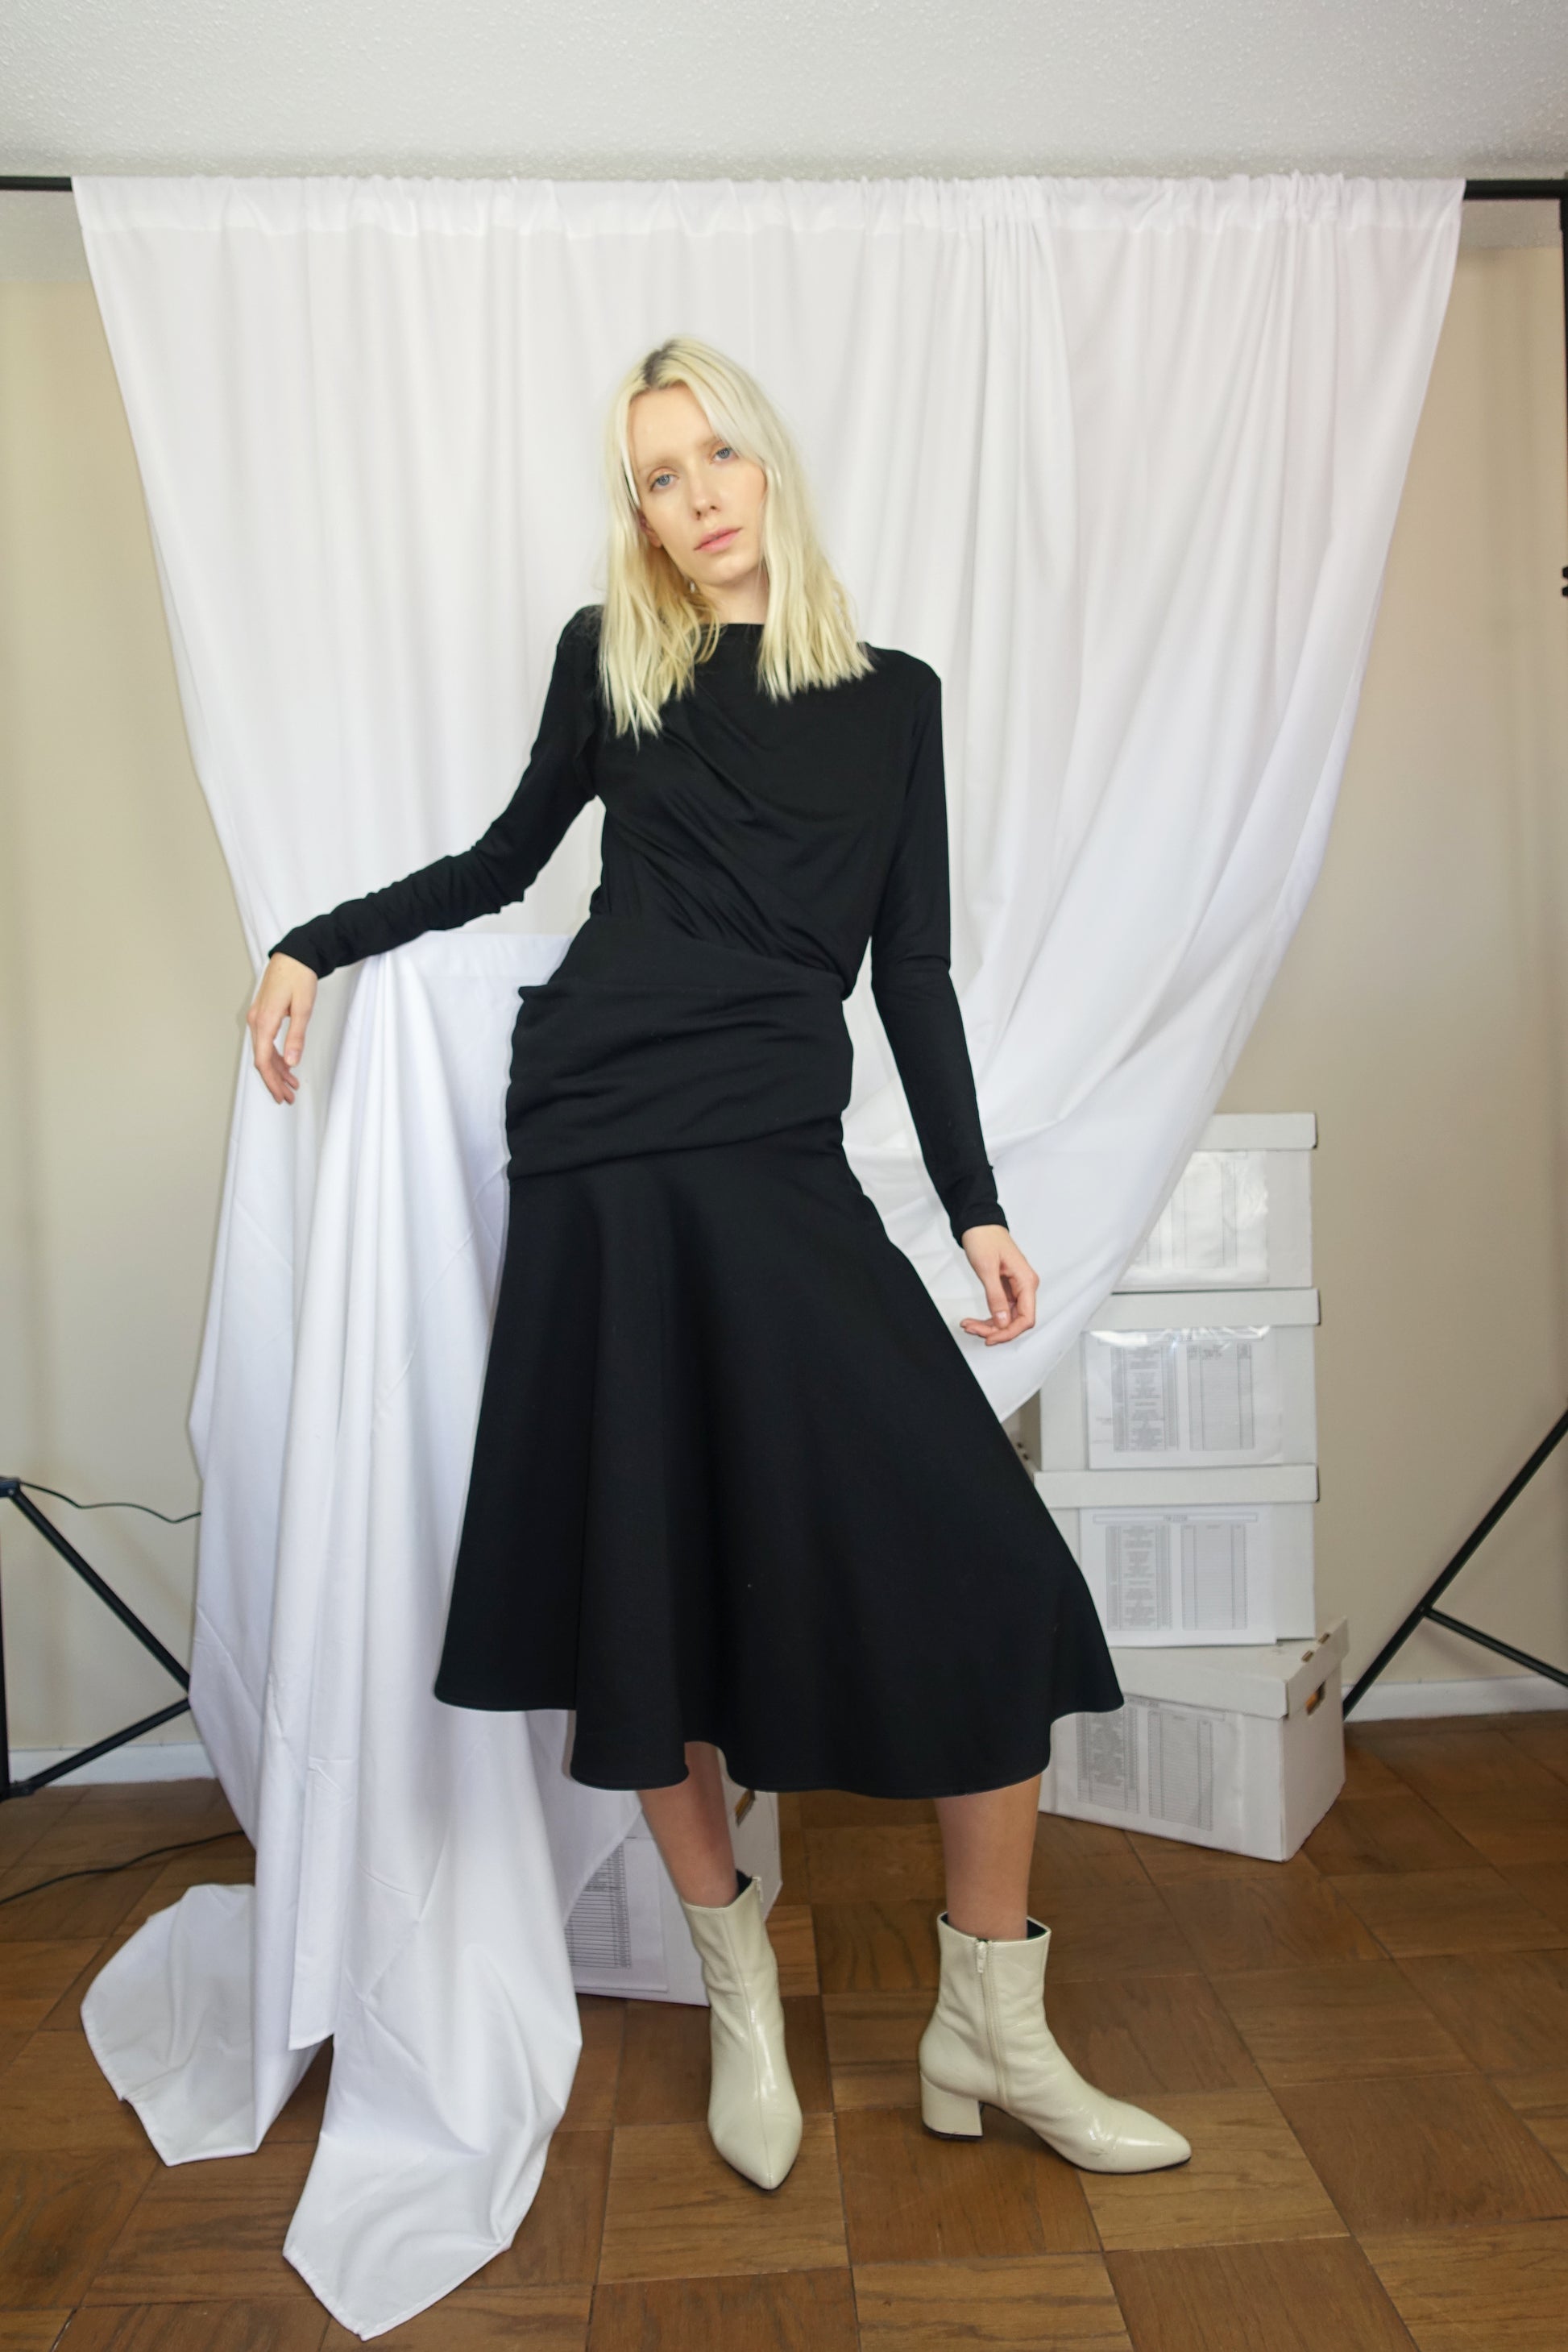 Woman posing in front of curtains wearing a black long sleeve shirt with a black accentuating skirt with stylized cut made of cotton and lyocell